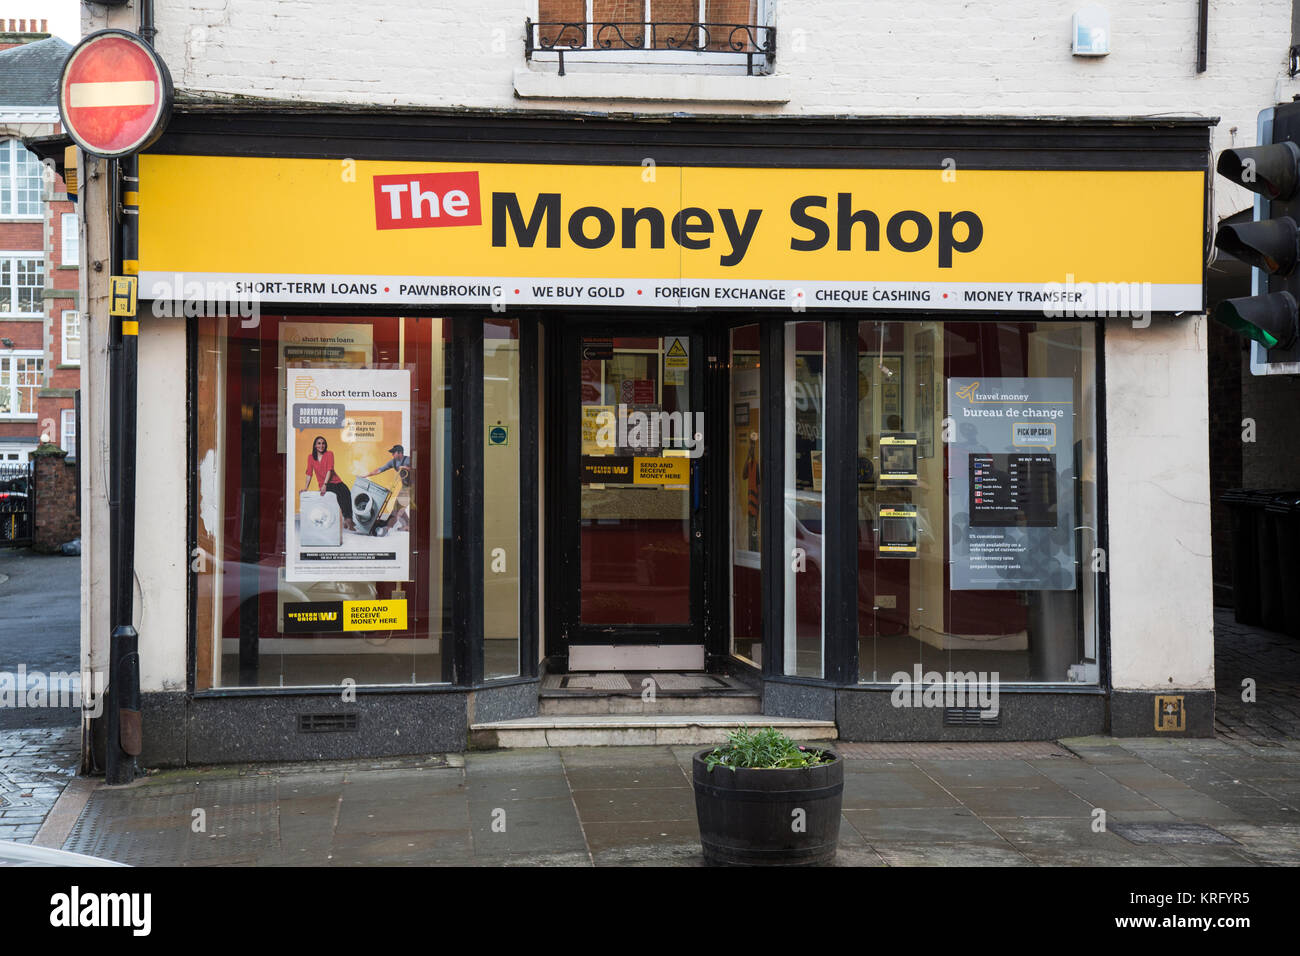 The Money Shop in Shrewsbury, England. Short Term loans, pawnbrokers, gold buyers, foreign exchange, cheque cashing, money transfer services. Stock Photo